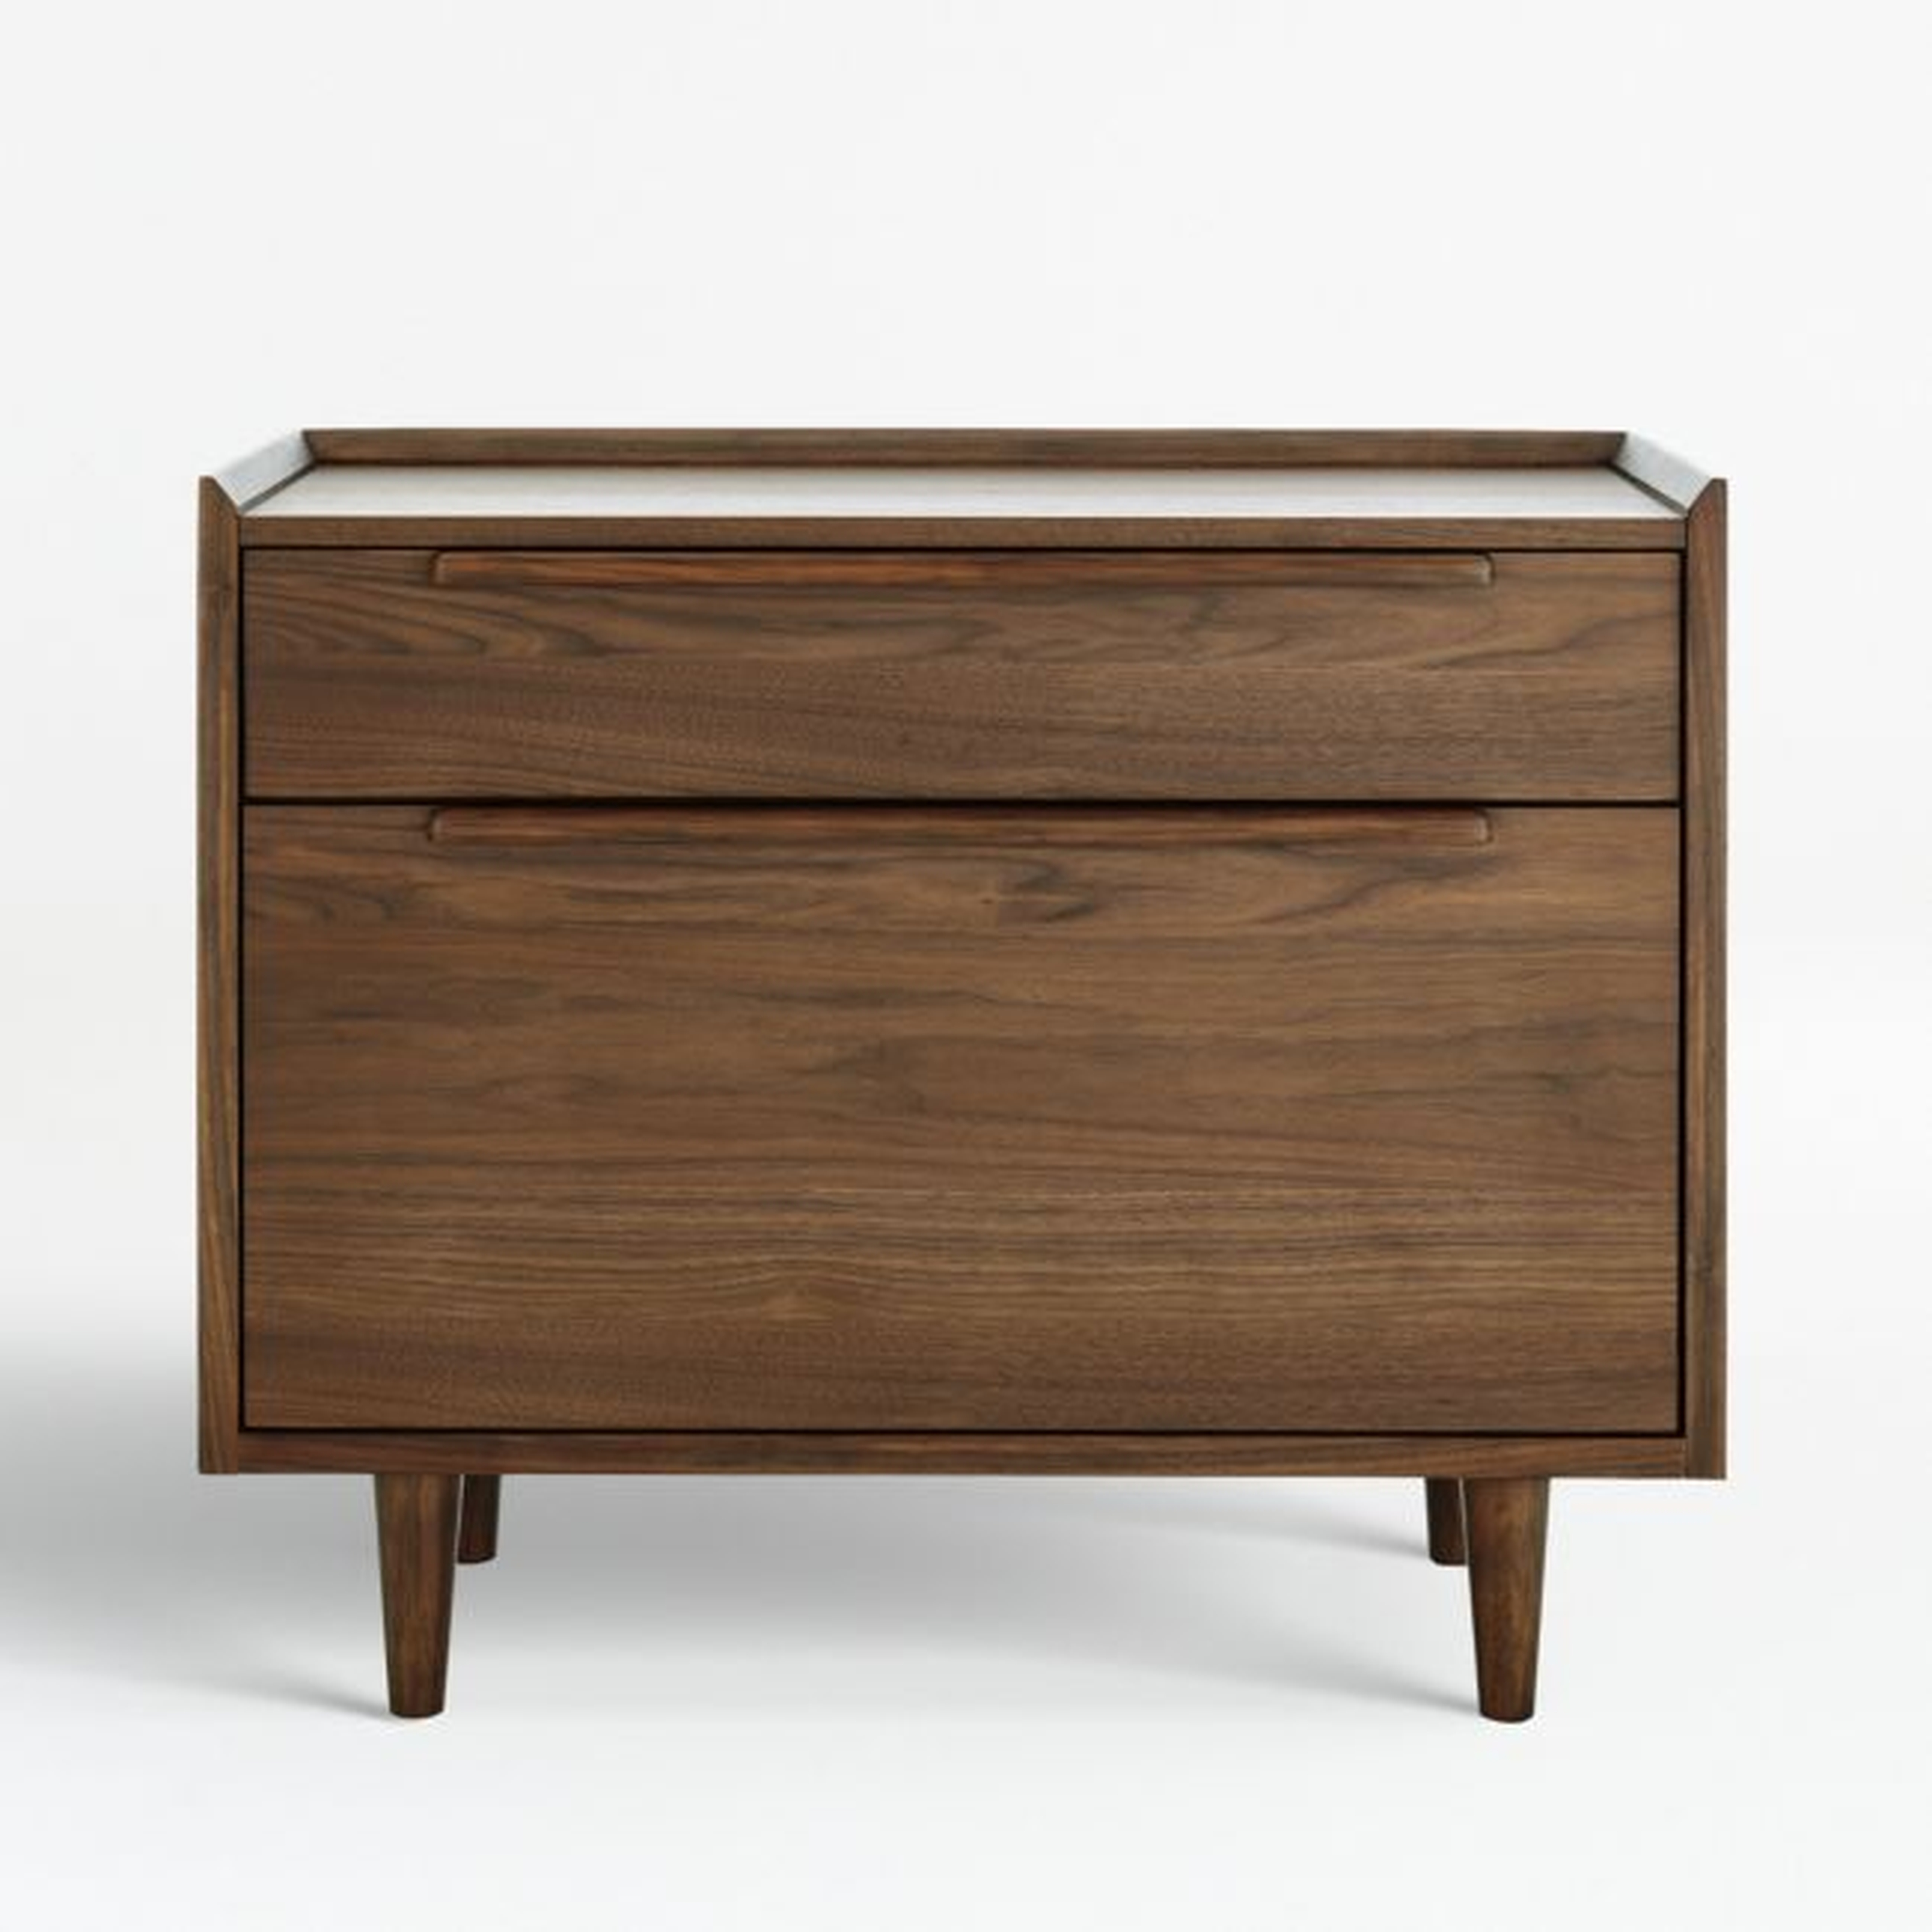 Tate Walnut Lateral File Cabinet - Crate and Barrel